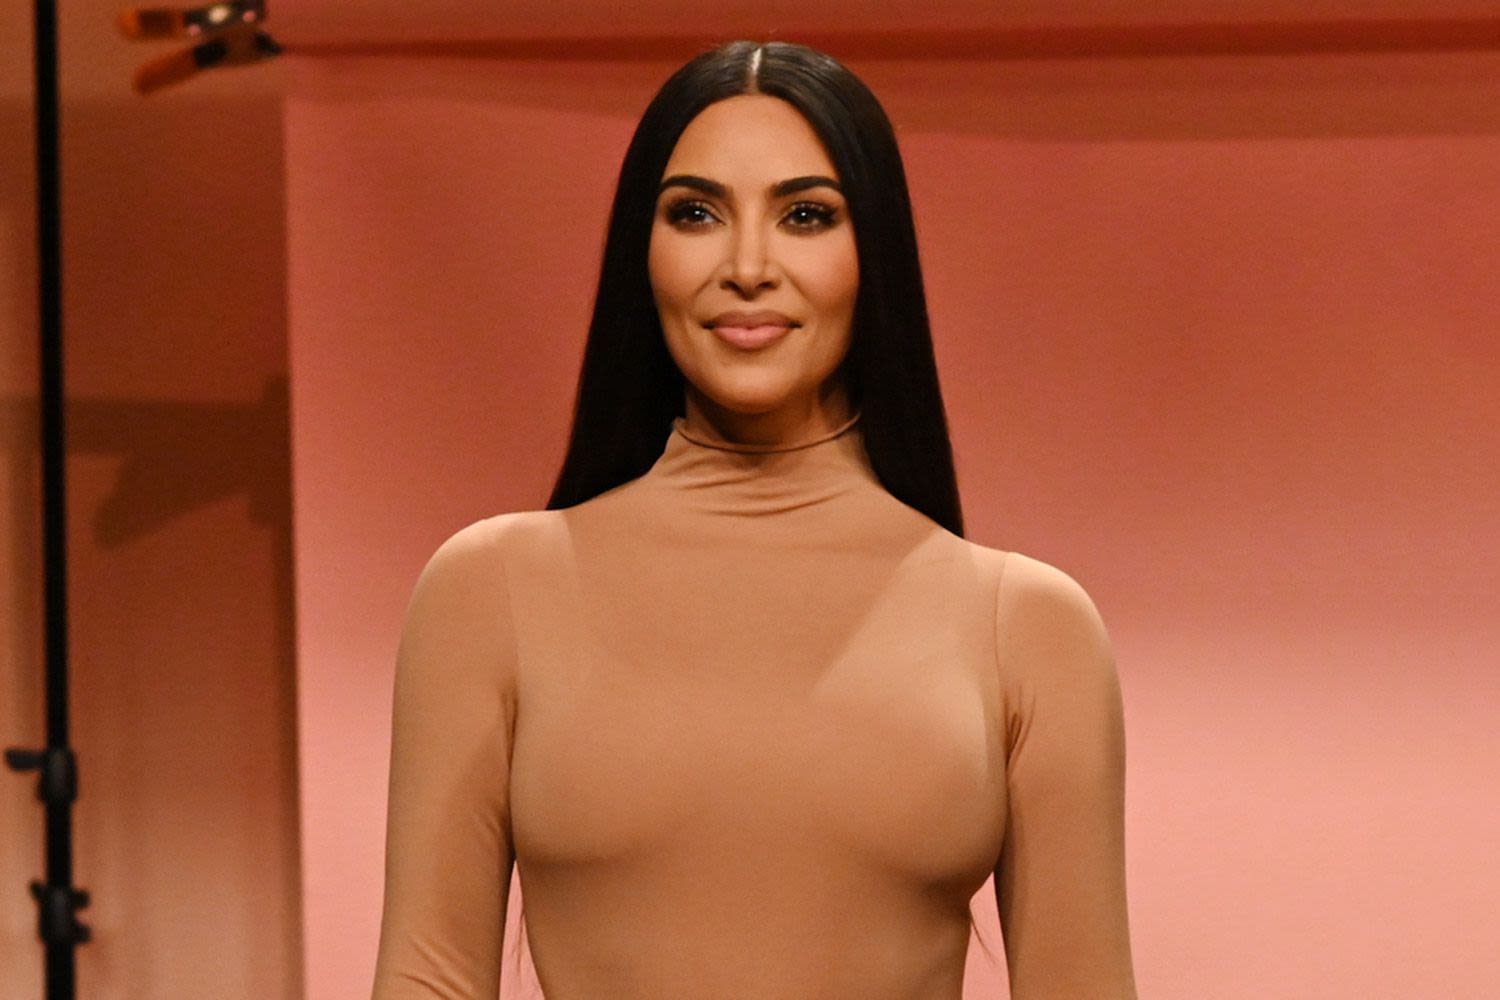 Kim Kardashian Admits Being a 'Lenient' Parent Has Been Easier for Her as She Tries to Be More Strict at Home